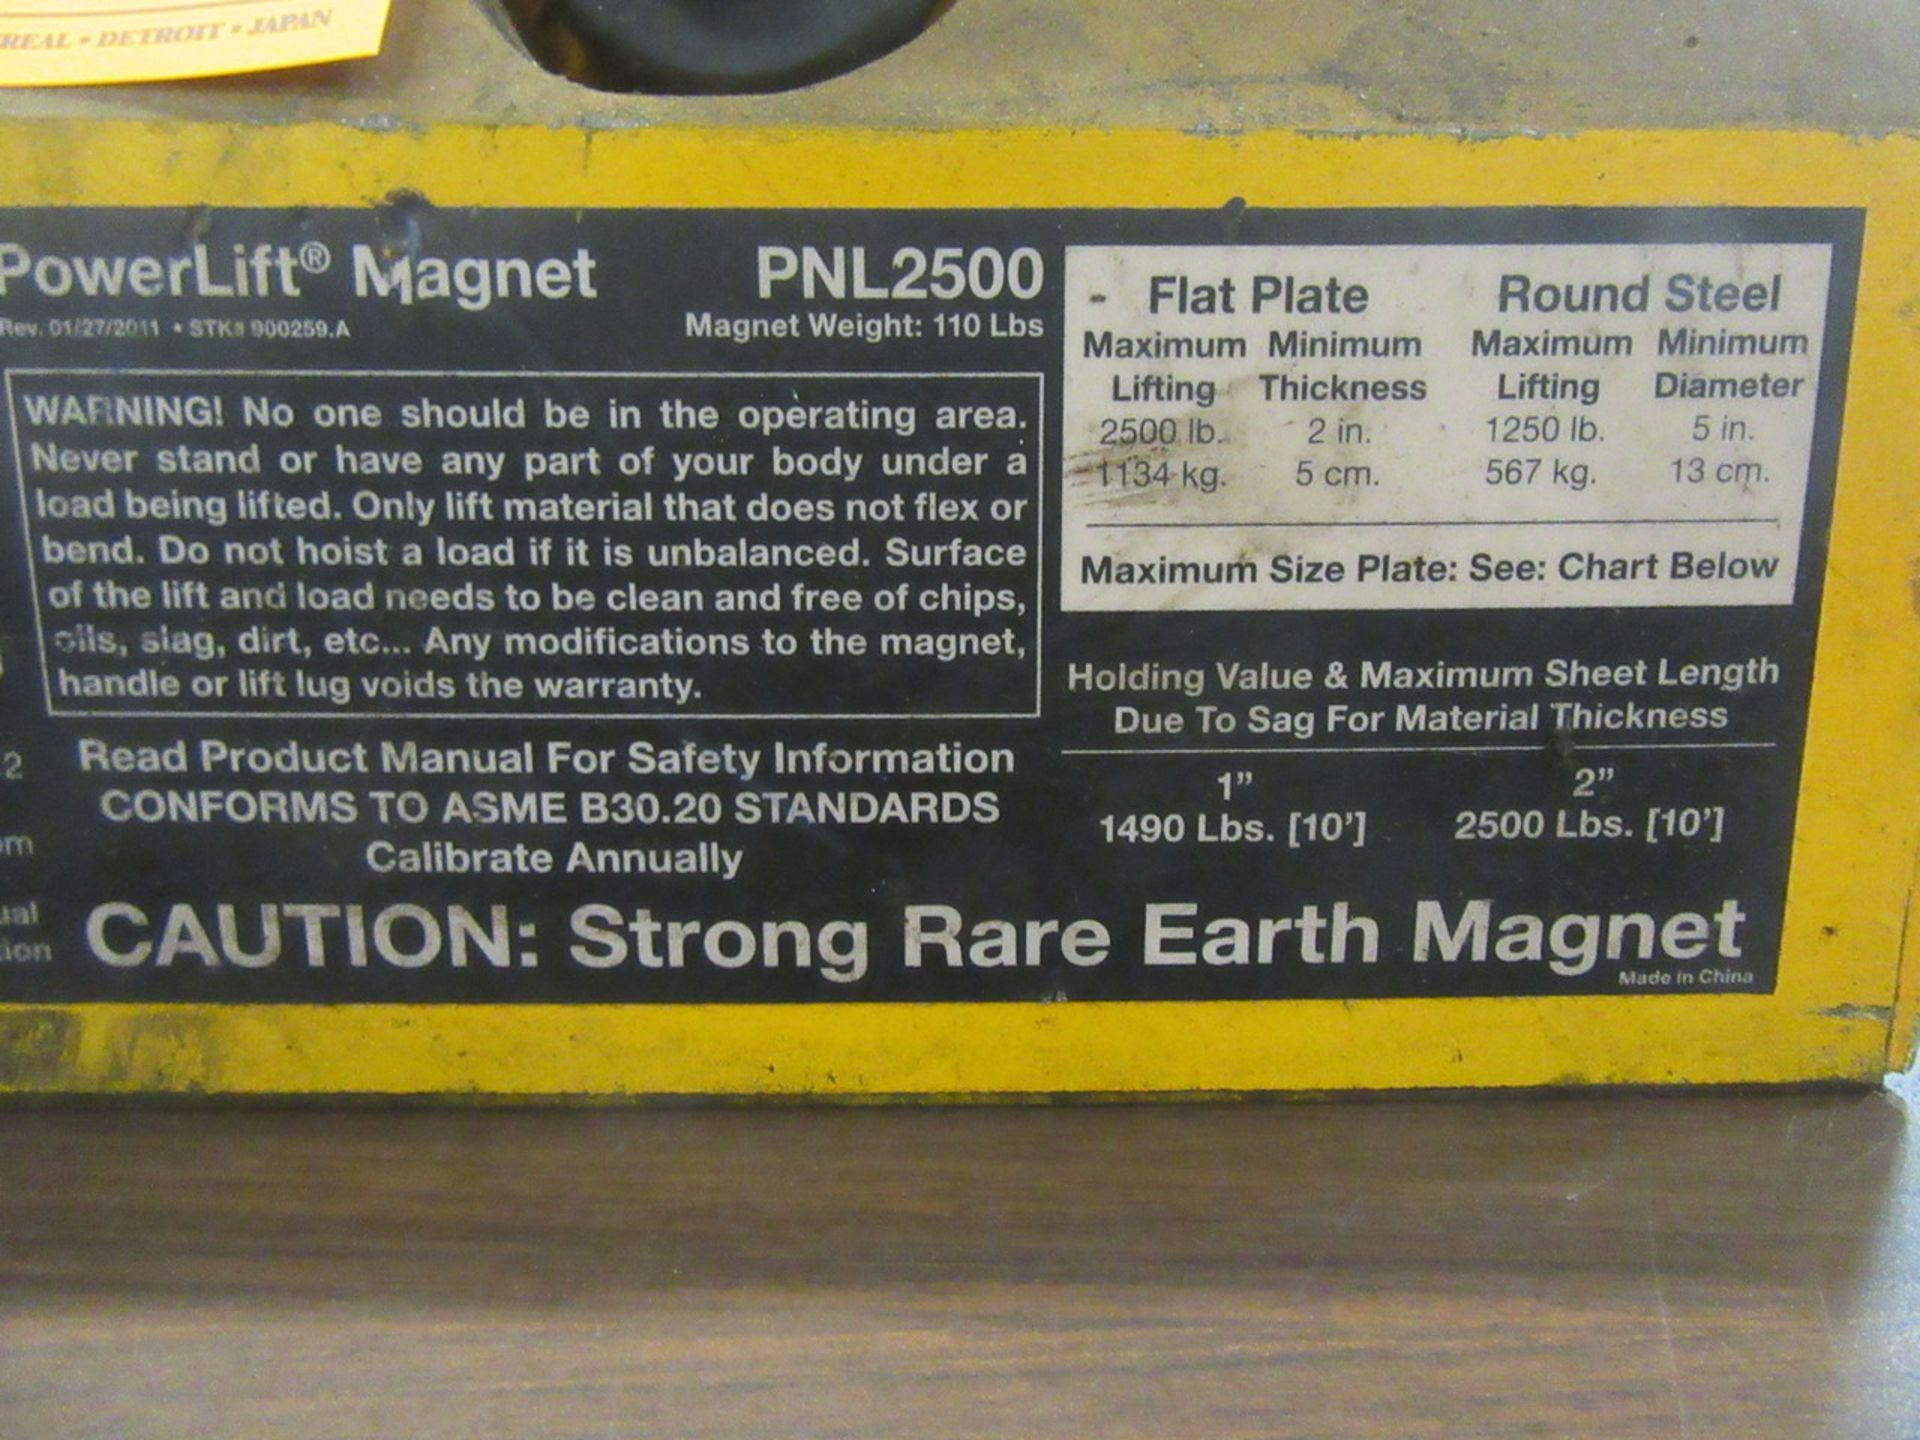 Mag-Mate PNL2500 Powerlift Magnet - Image 2 of 3